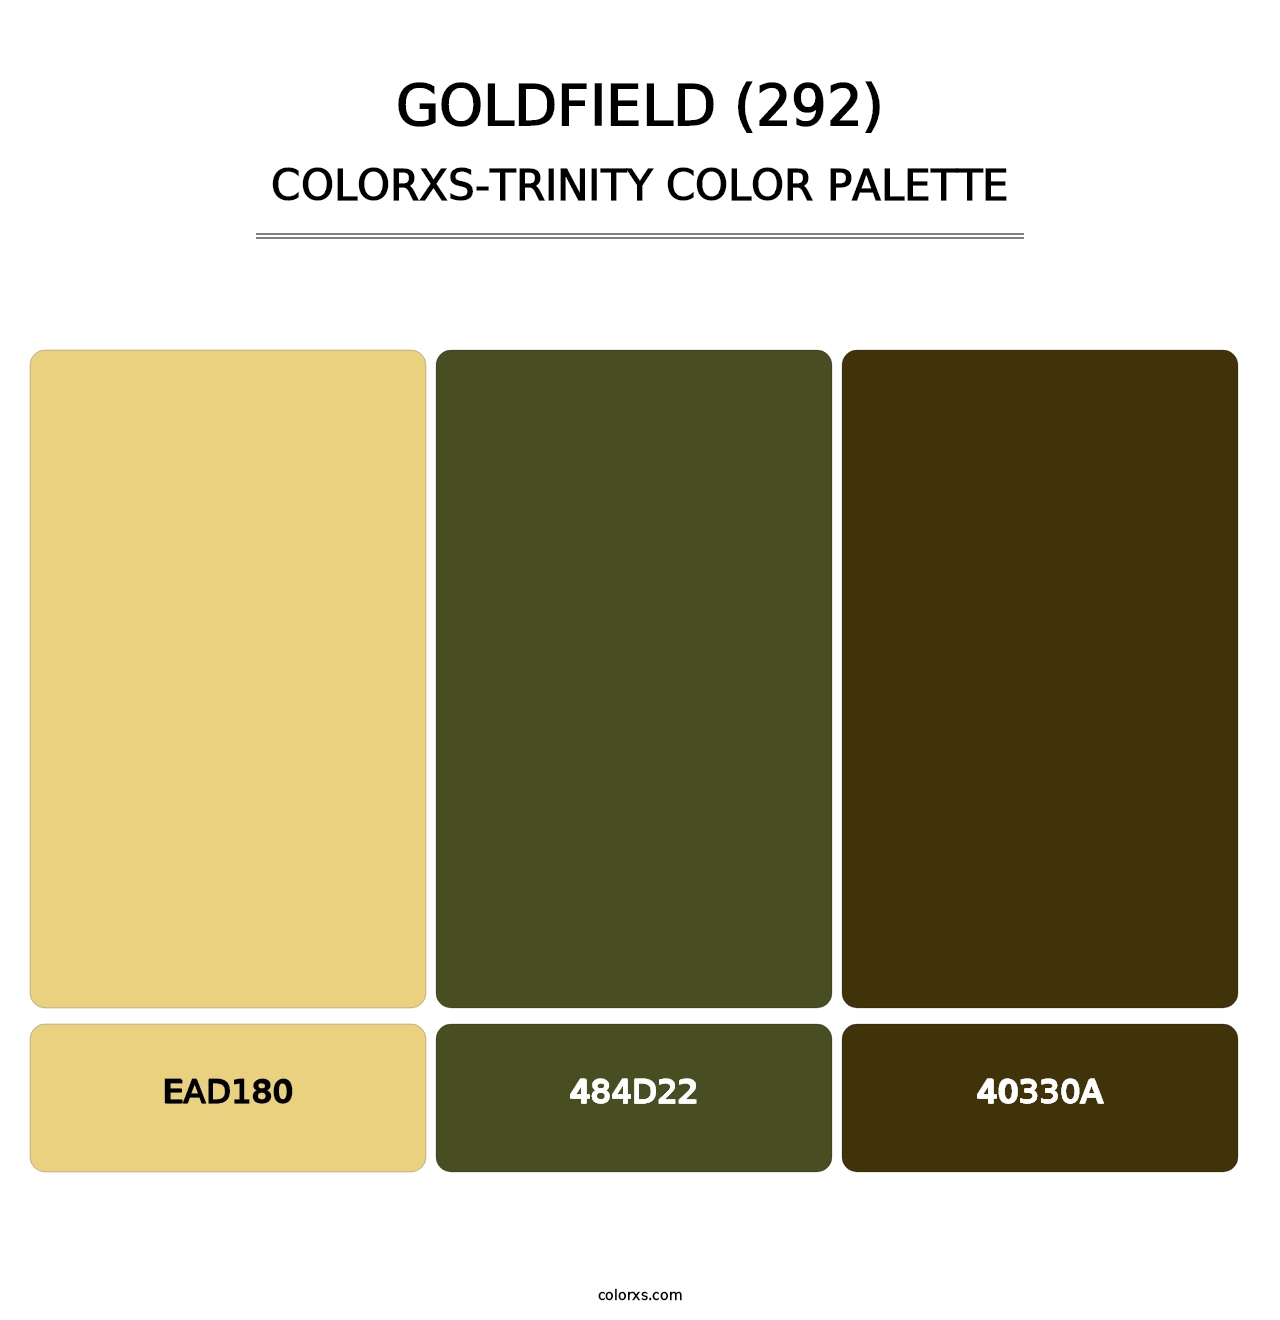 Goldfield (292) - Colorxs Trinity Palette